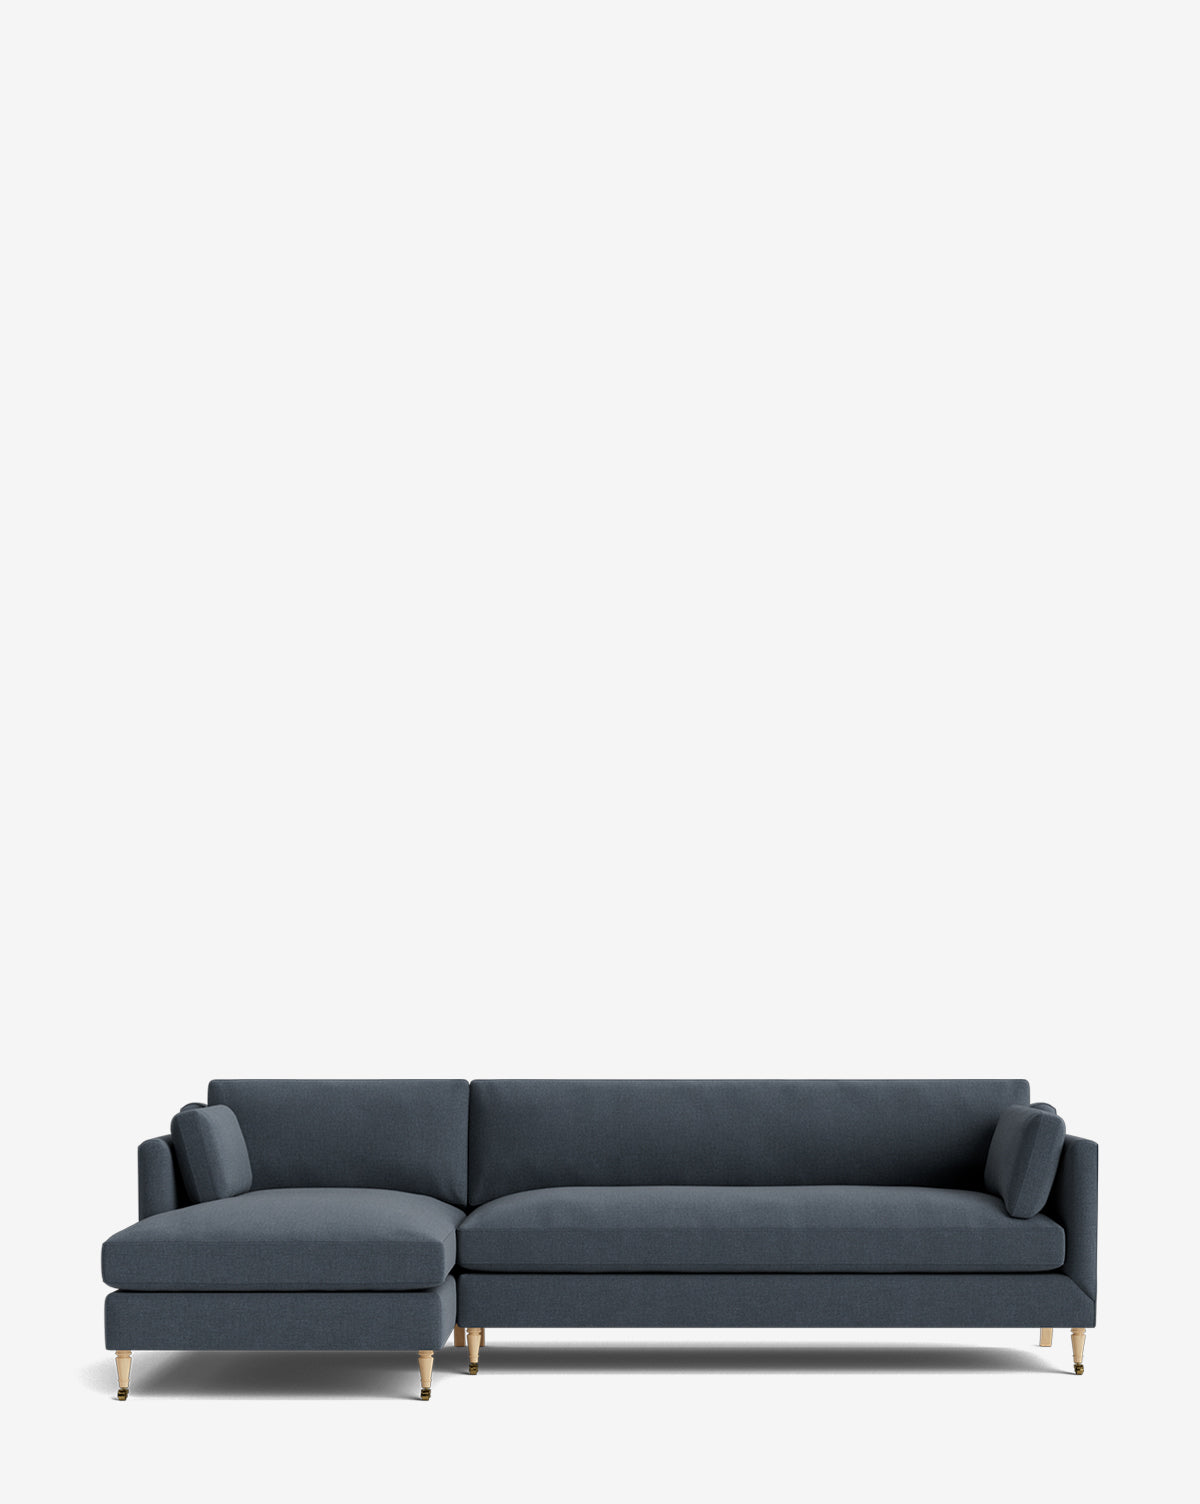 Rowe Fine Furniture, Haverford Upholstered Sectional